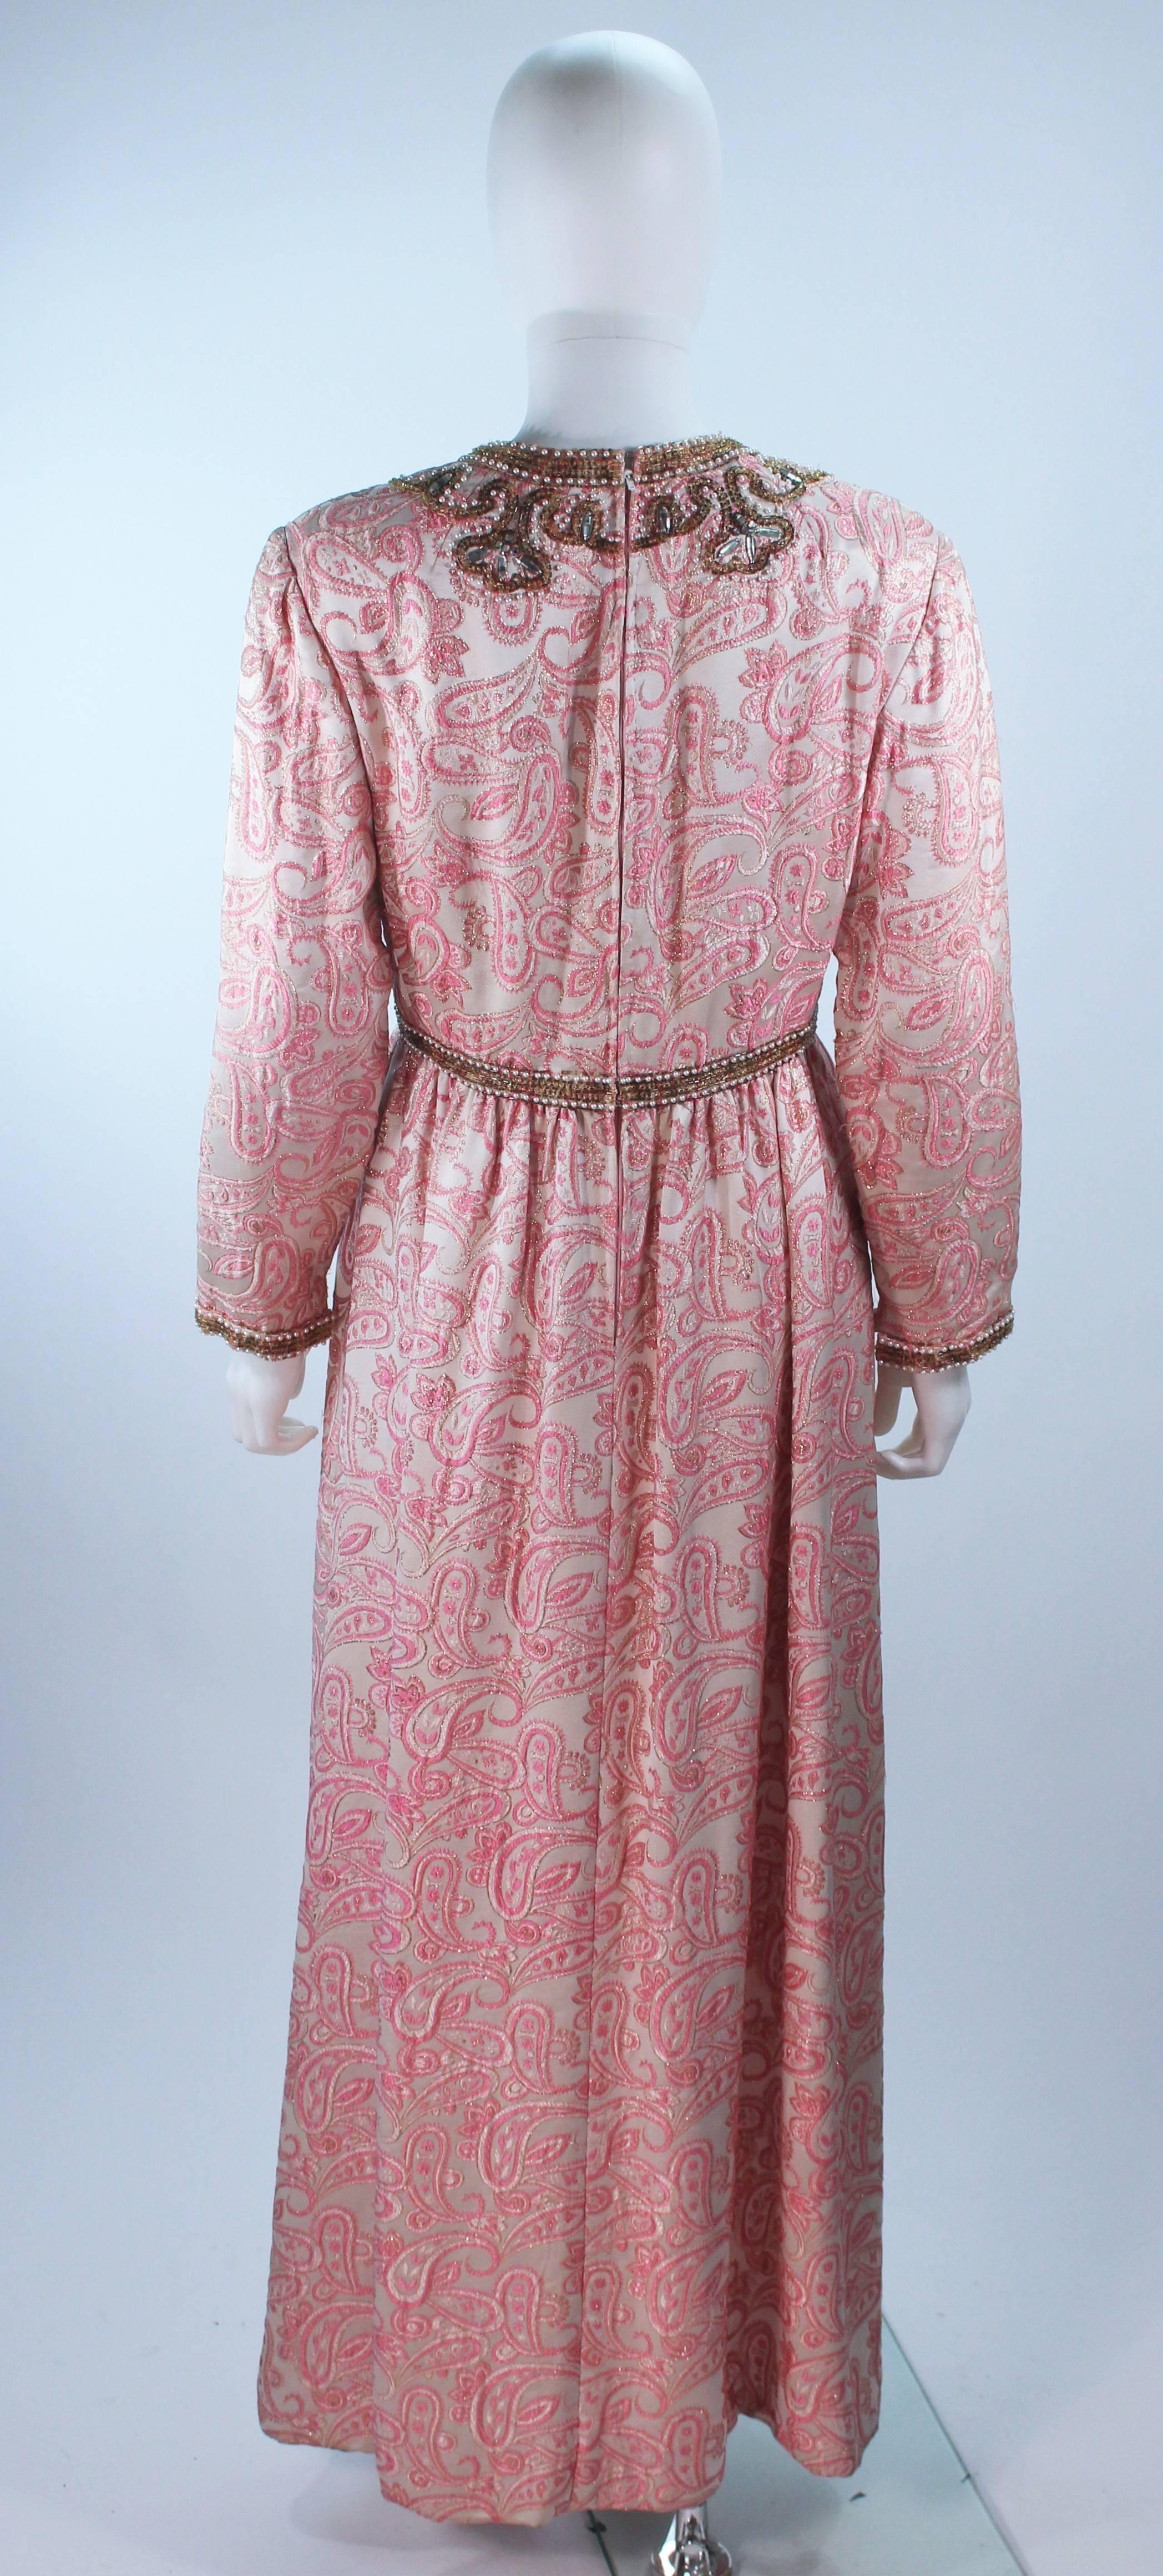 CEIL CHAPMAN 1960's Pink Paisley Brocade Gown with Beaded Applique Size 6 8 3